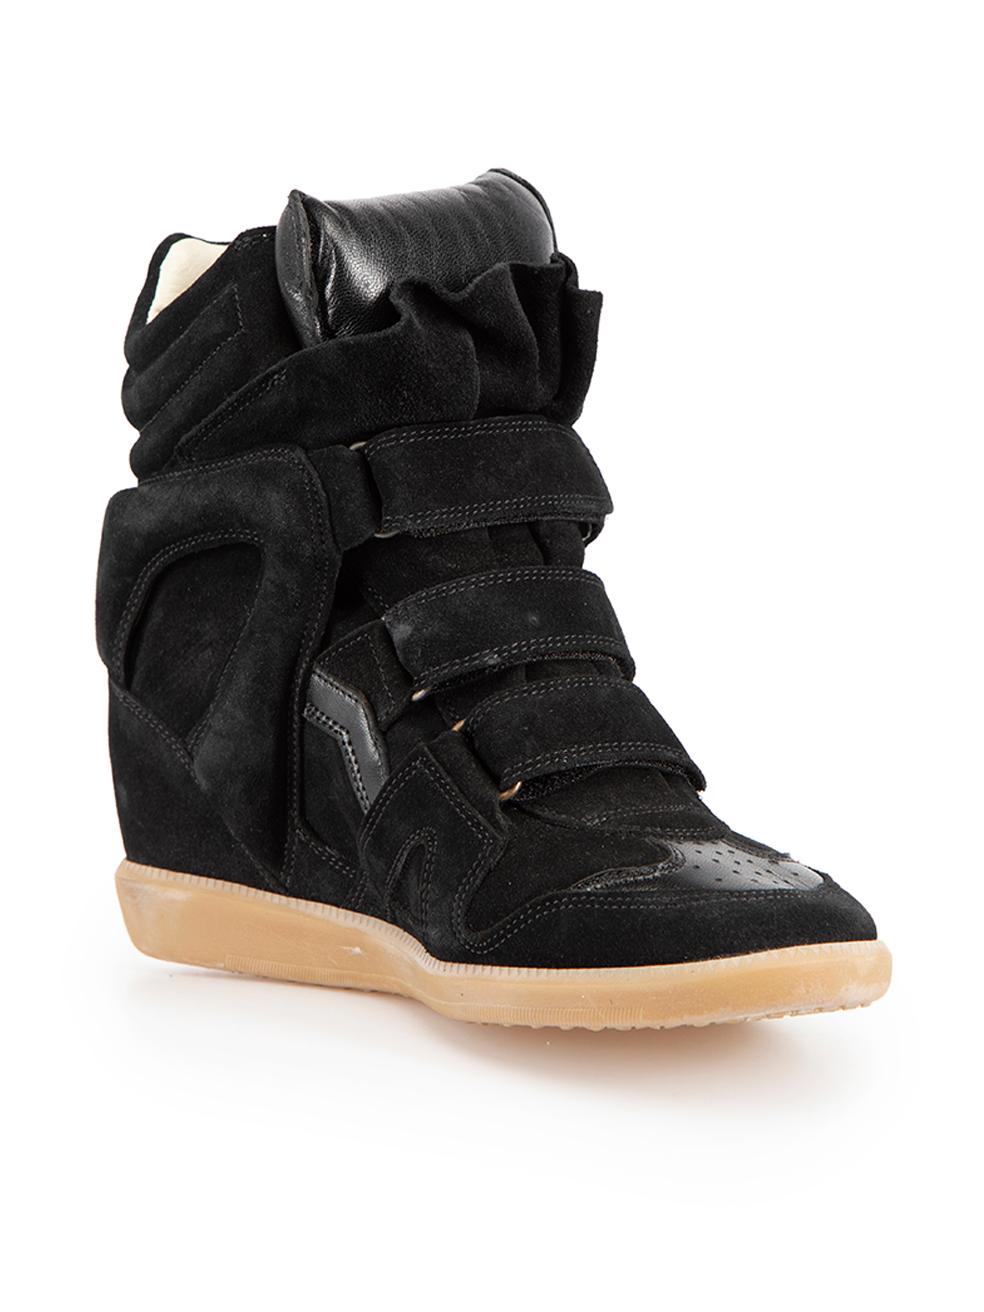 CONDITION is Very good. Hardly any visible wear to trainers is evident on this used Isabel Marant designer resale item. Comes in original box with dust bag.

Details
Black
Suede
Wedge trainers
High heeled
High top
Round toe
Velcro fastening
 
Made